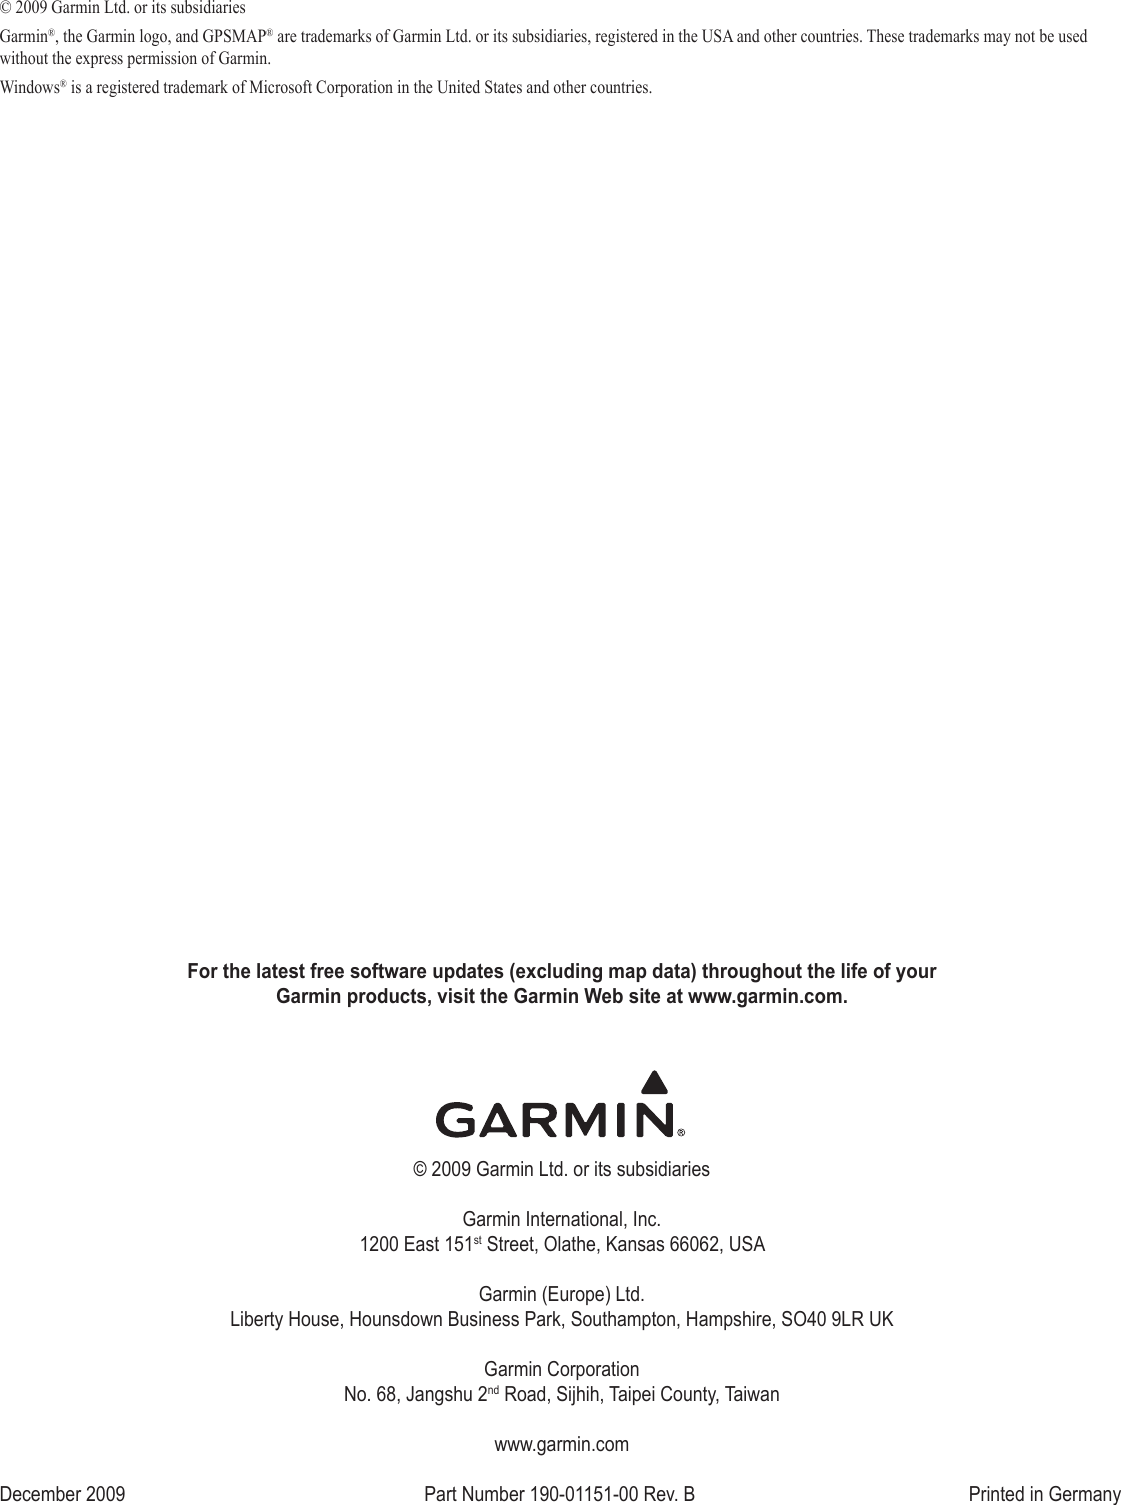 For the latest free software updates (excluding map data) throughout the life of your  Garmin products, visit the Garmin Web site at www.garmin.com.© 2009 Garmin Ltd. or its subsidiariesGarmin International, Inc. 1200 East 151st Street, Olathe, Kansas 66062, USAGarmin (Europe) Ltd. Liberty House, Hounsdown Business Park, Southampton, Hampshire, SO40 9LR UKGarmin Corporation No. 68, Jangshu 2nd Road, Sijhih, Taipei County, Taiwanwww.garmin.comDecember 2009  Part Number 190-01151-00 Rev. B  Printed in Germany© 2009 Garmin Ltd. or its subsidiariesGarmin®, the Garmin logo, and GPSMAP® are trademarks of Garmin Ltd. or its subsidiaries, registered in the USA and other countries. These trademarks may not be used without the express permission of Garmin.Windows® is a registered trademark of Microsoft Corporation in the United States and other countries.